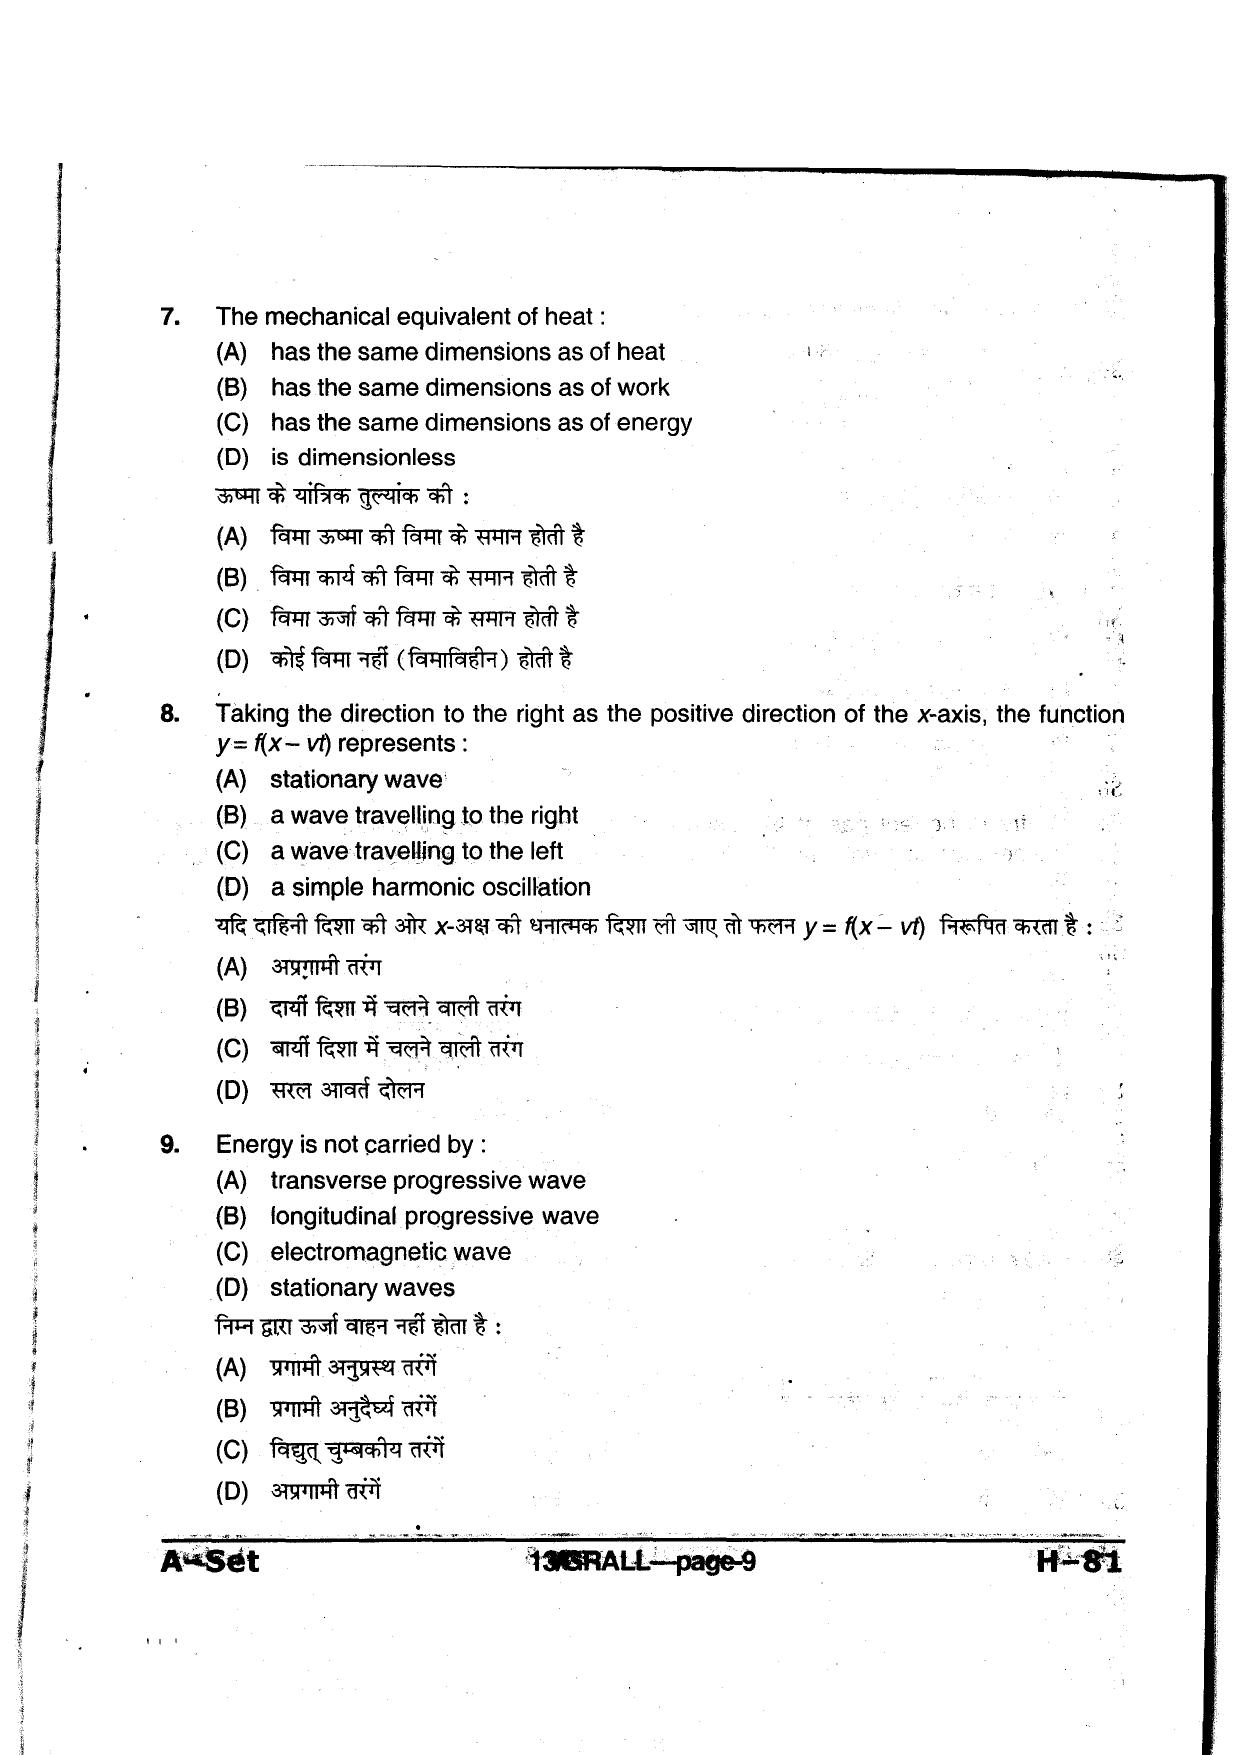 MP PAT 2013 Question Paper - Paper I - Page 9